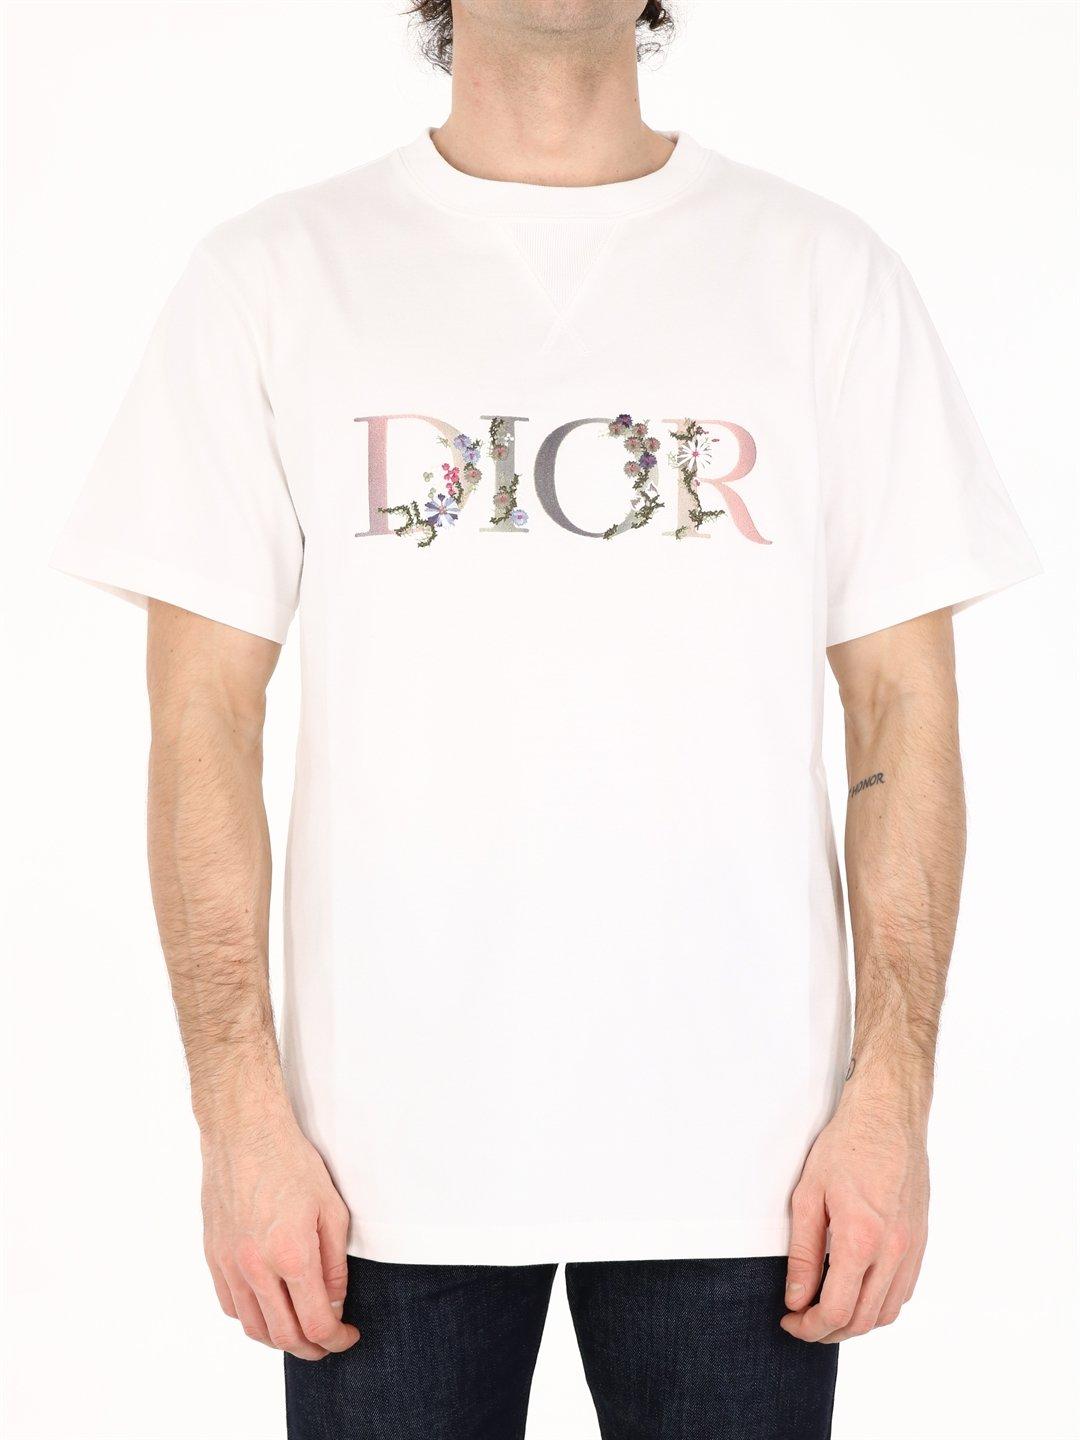 Dior T-shirt Dior Flowers White for Men | Lyst Canada